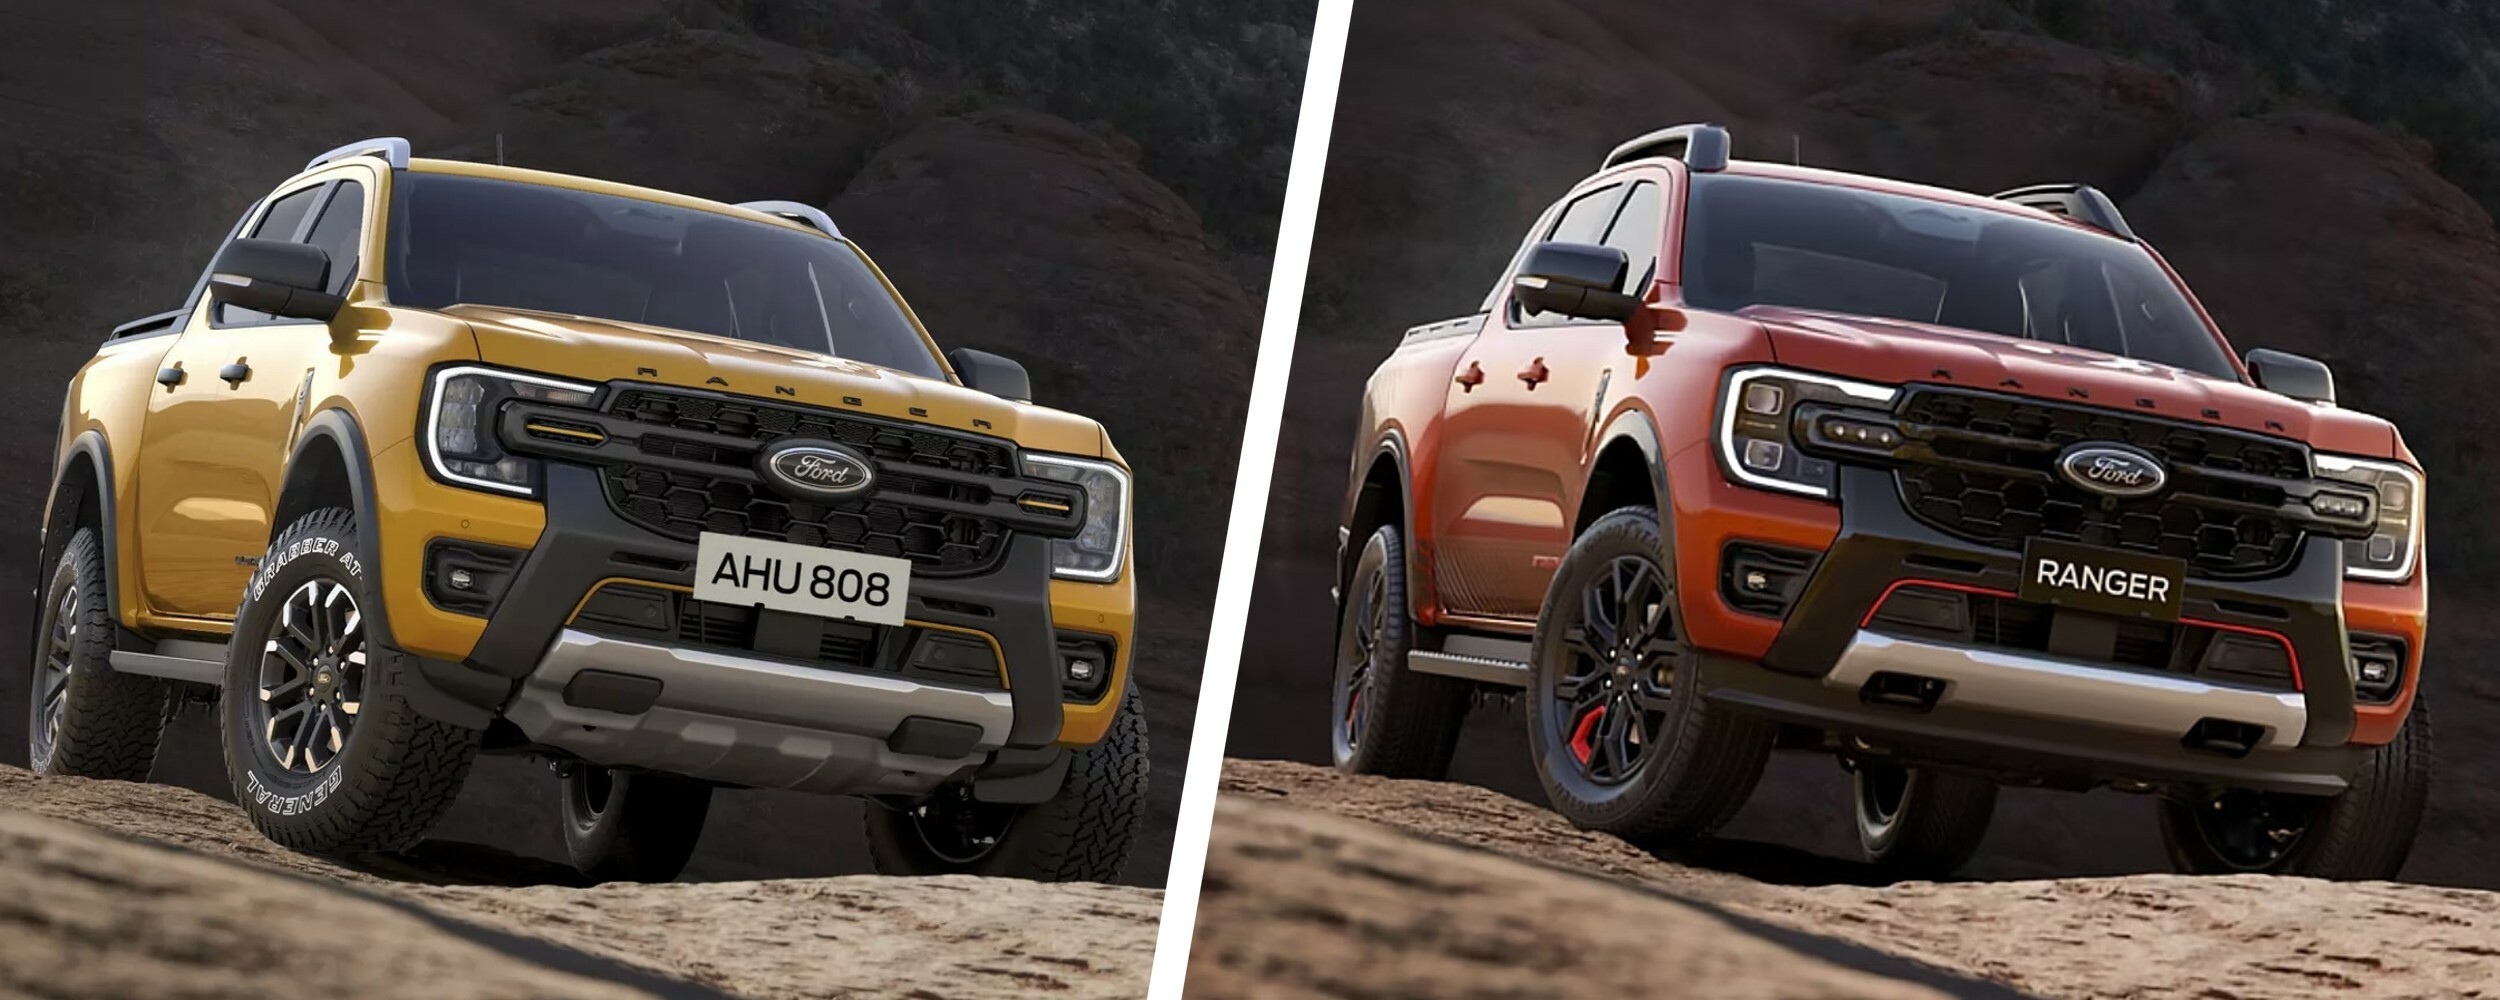 Ford Ranger Stormtrak Debuts In Thailand As A Wildtrak With Extra Glitter